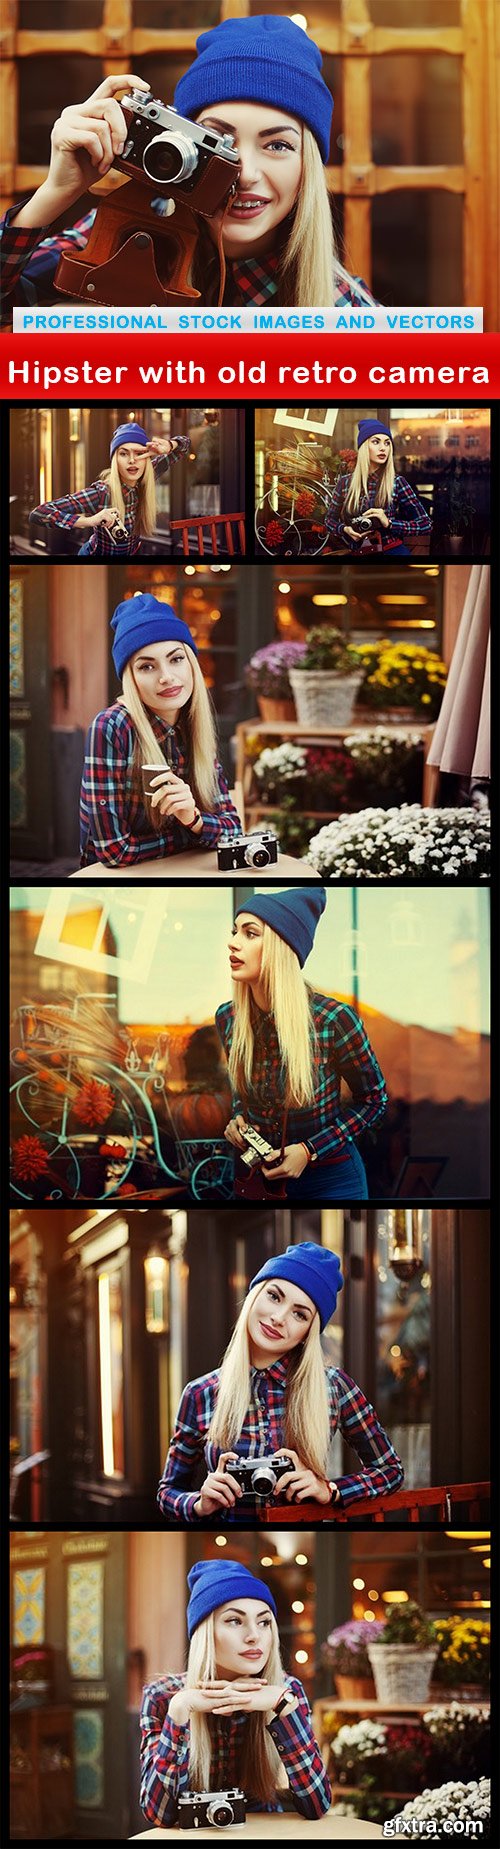 Hipster with old retro camera - 7 UHQ JPEG